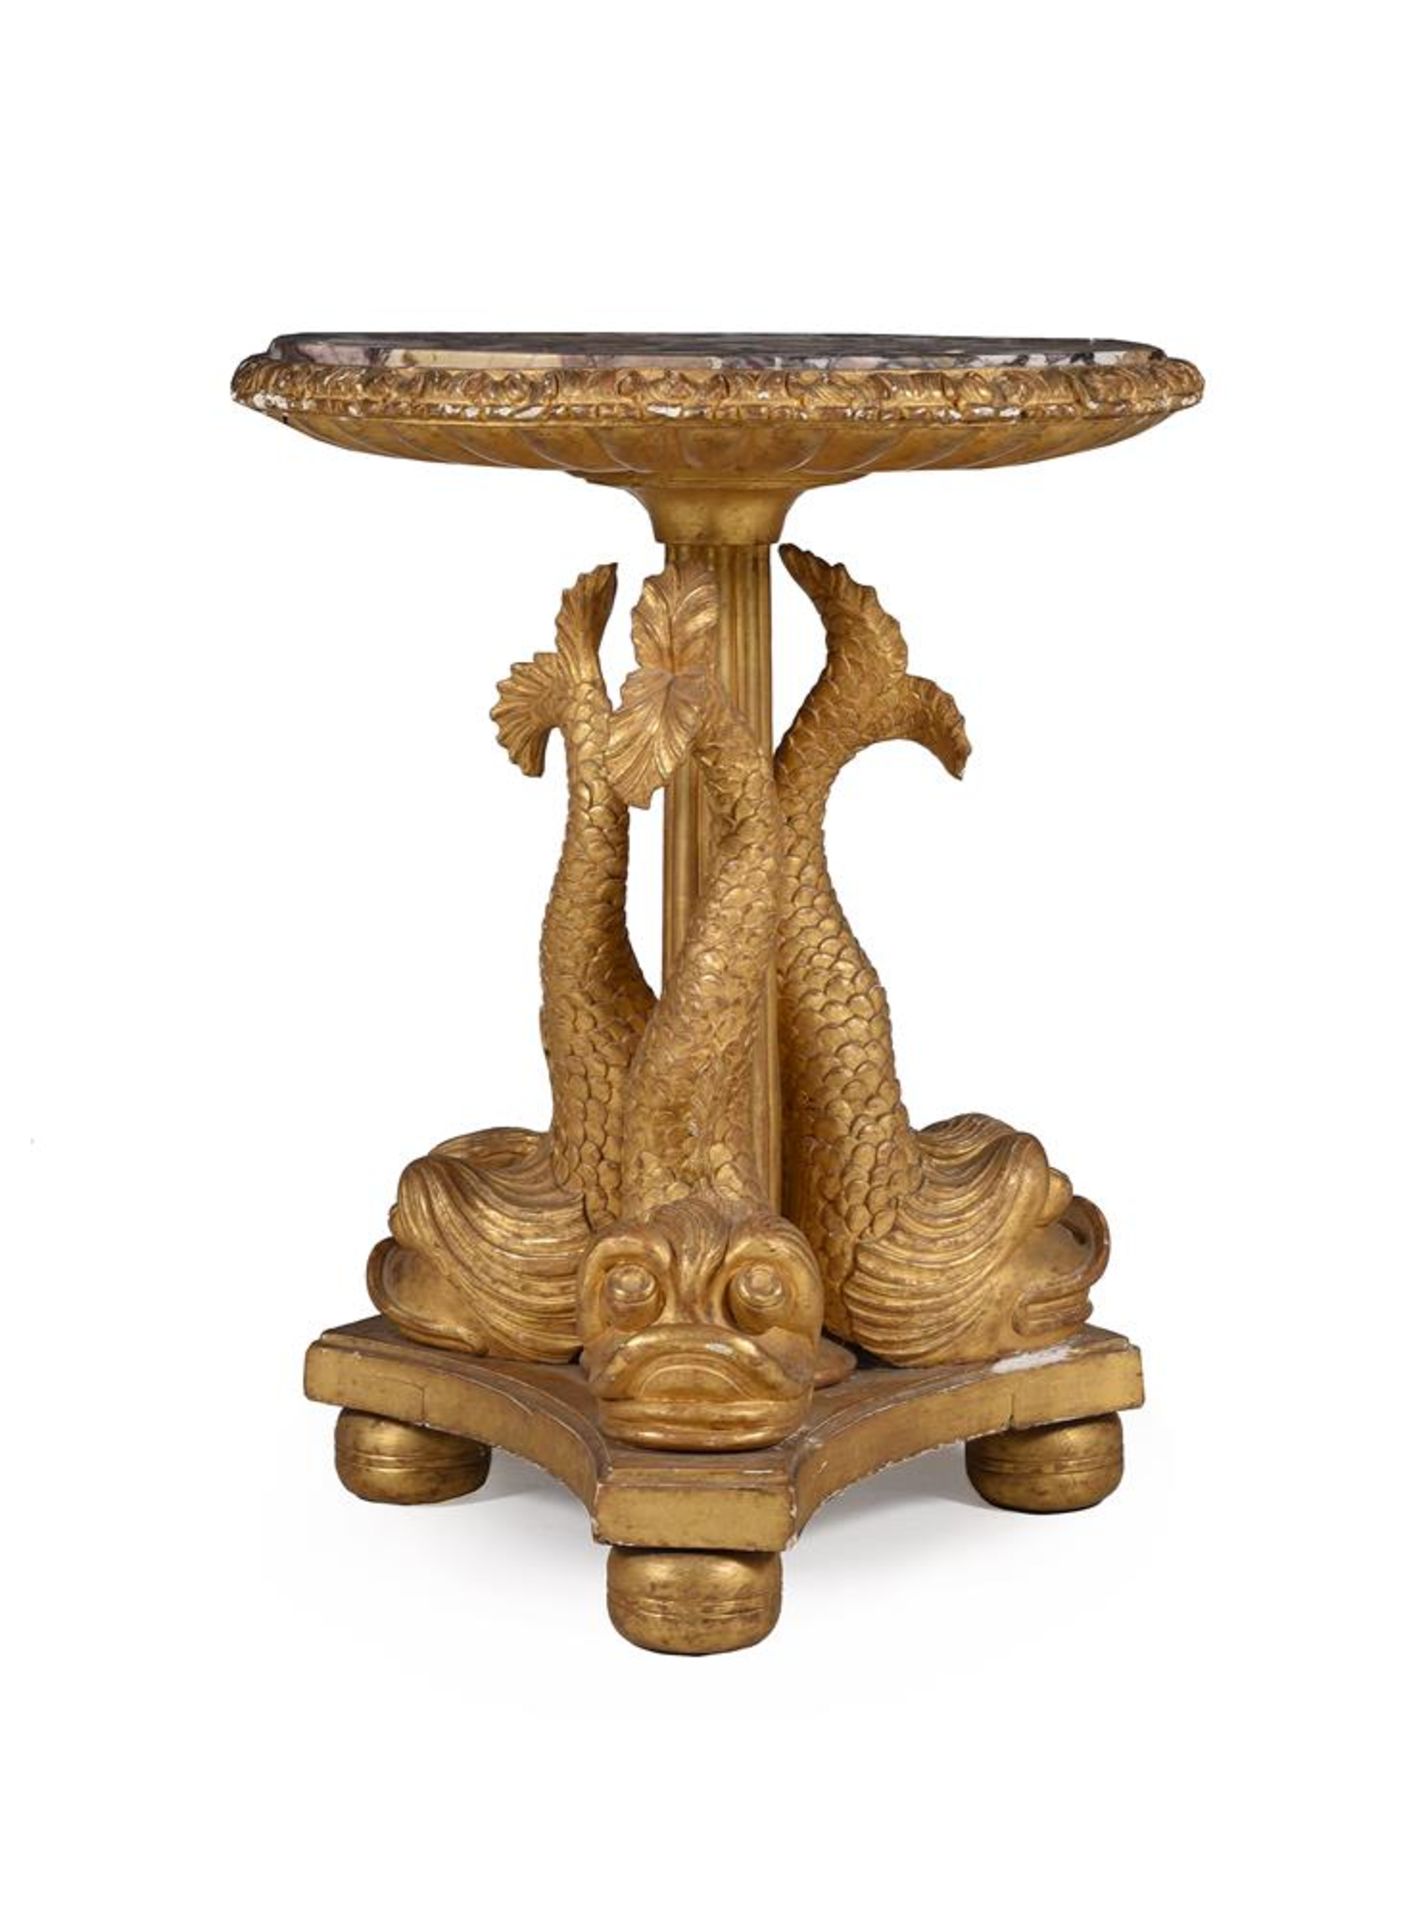 A WILLIAM IV GILTWOOD AND MARBLE TABLE, CIRCA 1835